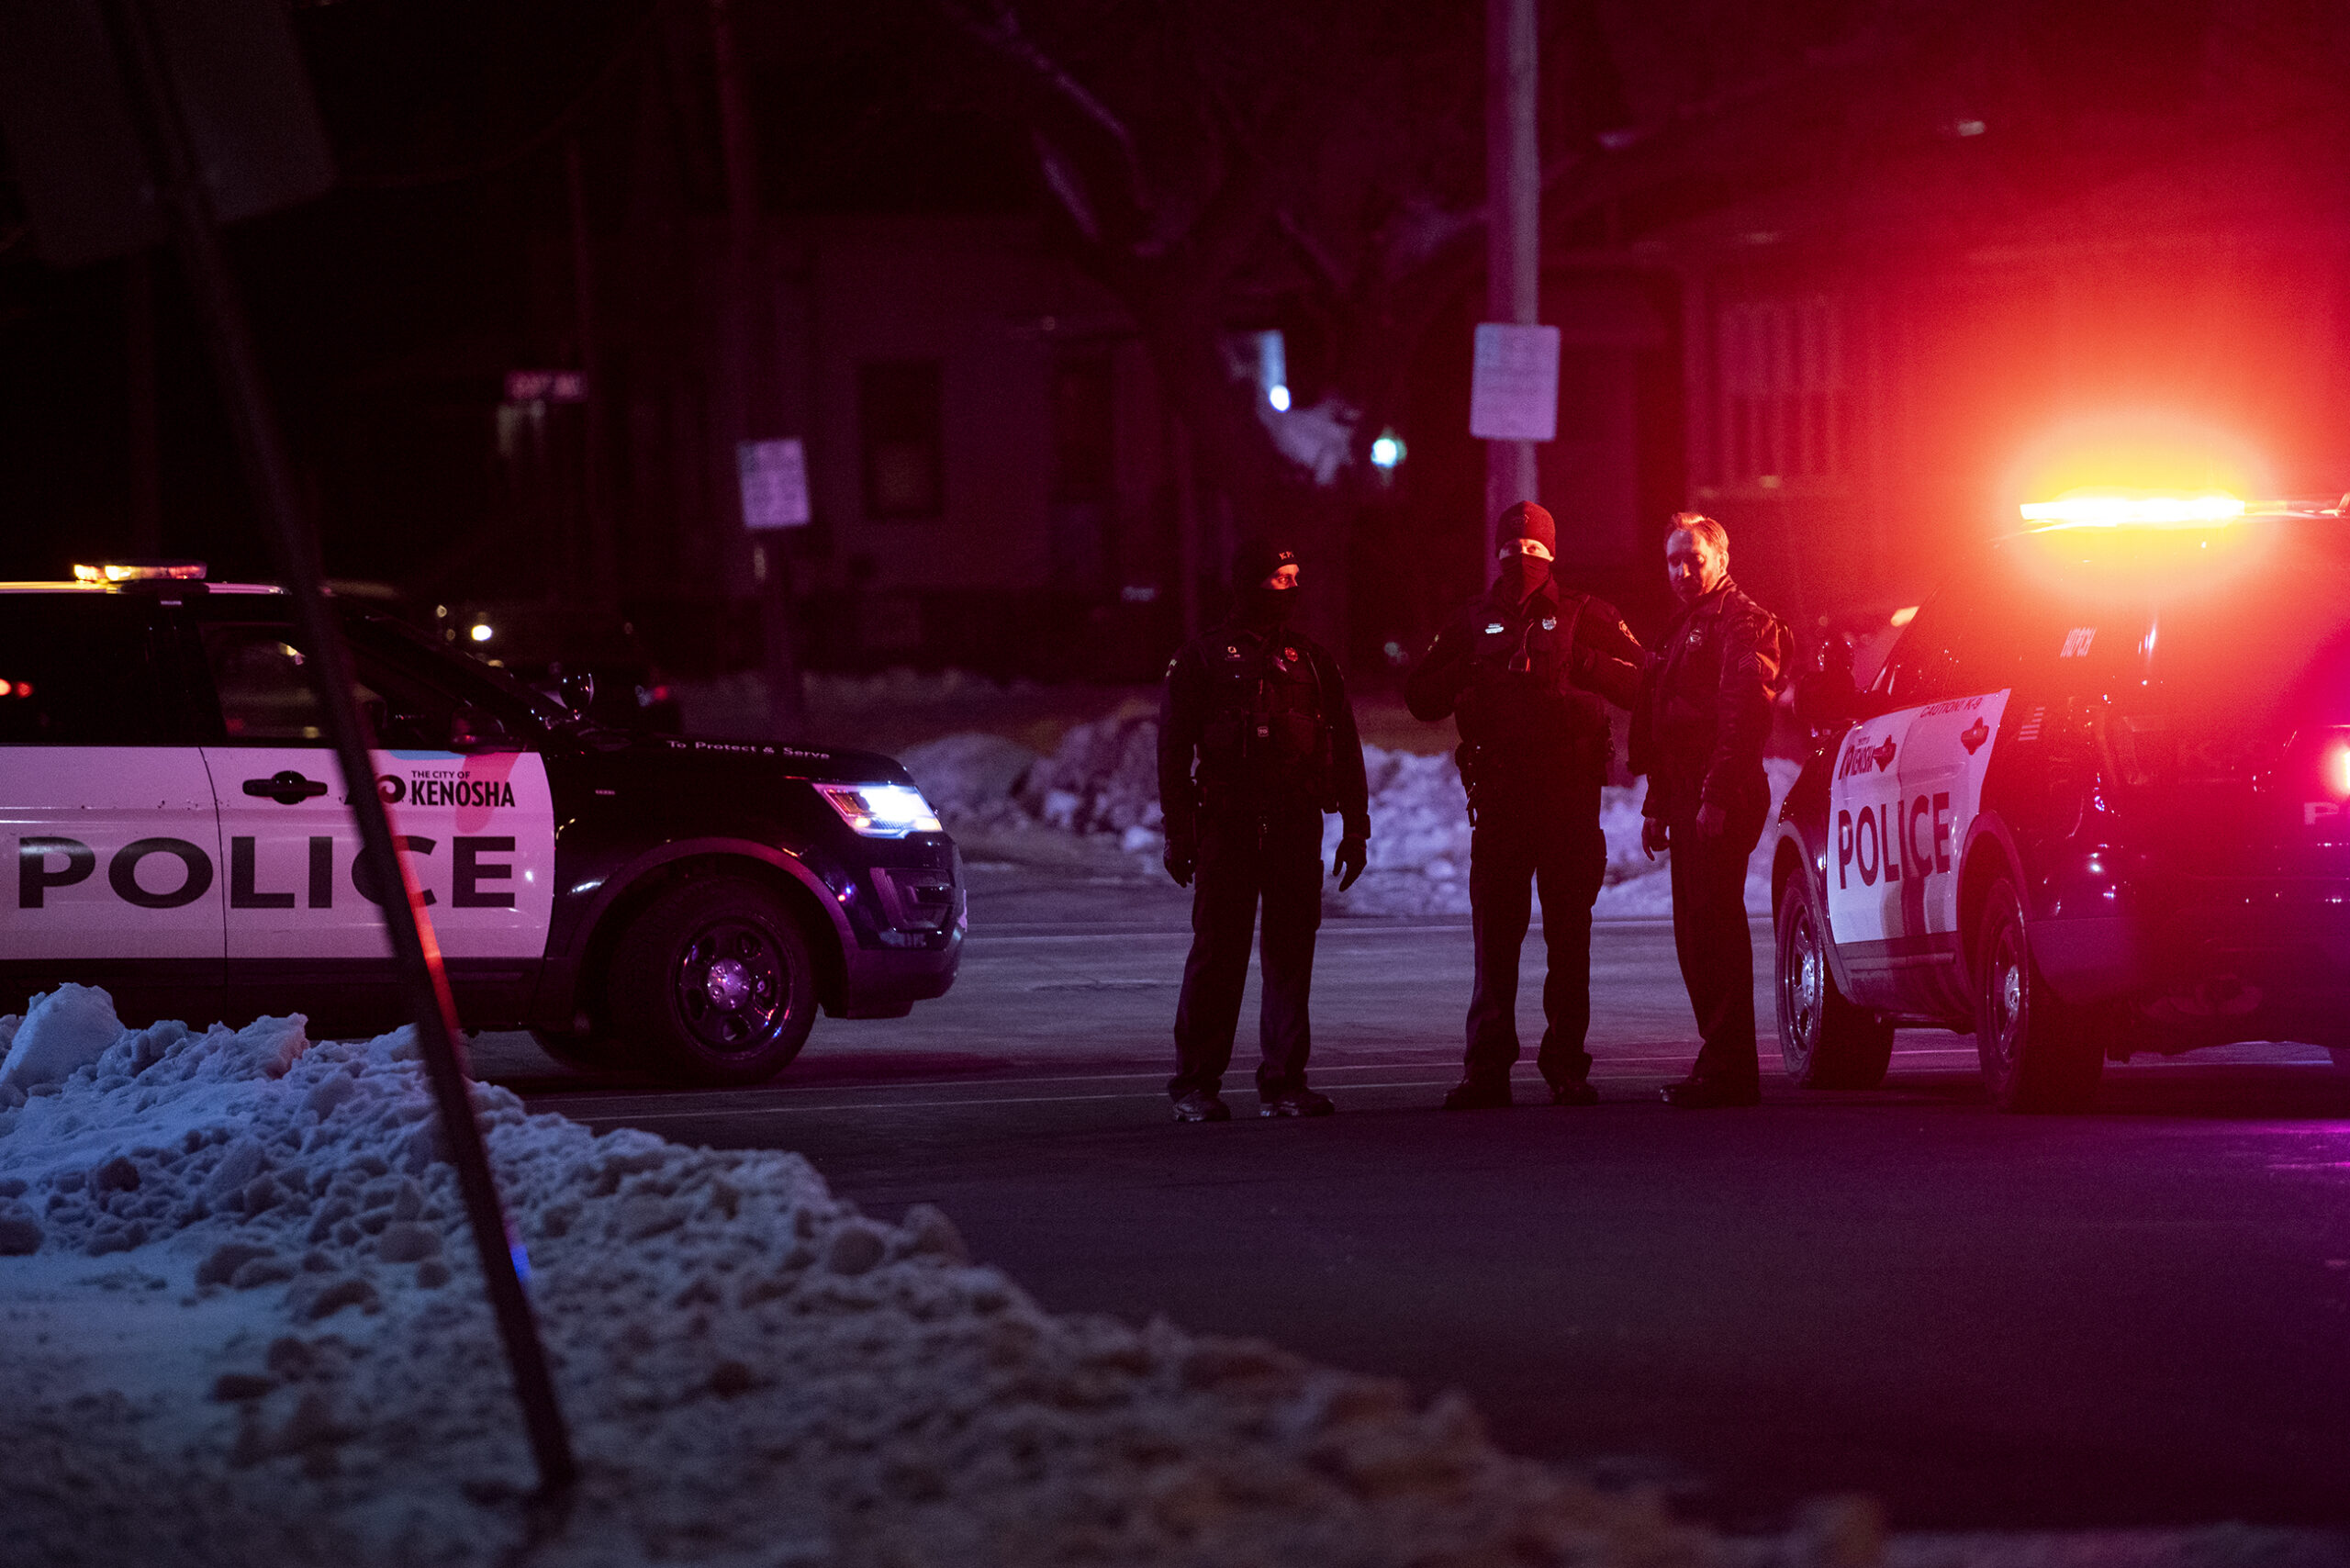 red police lights fill the darkness as three police officers stand together in a road